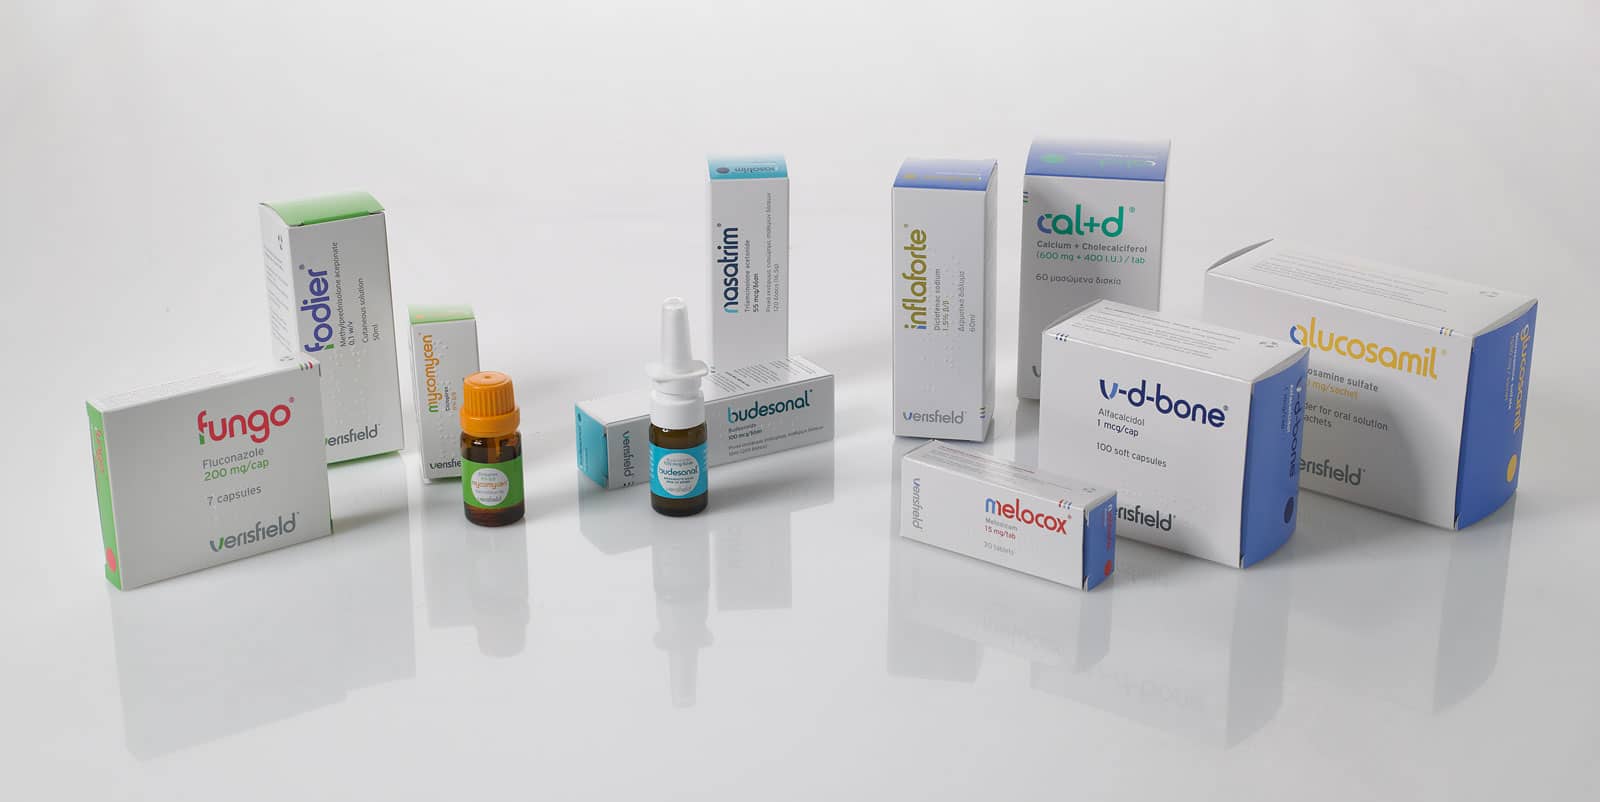 Verisfield Pharmaceutical Products